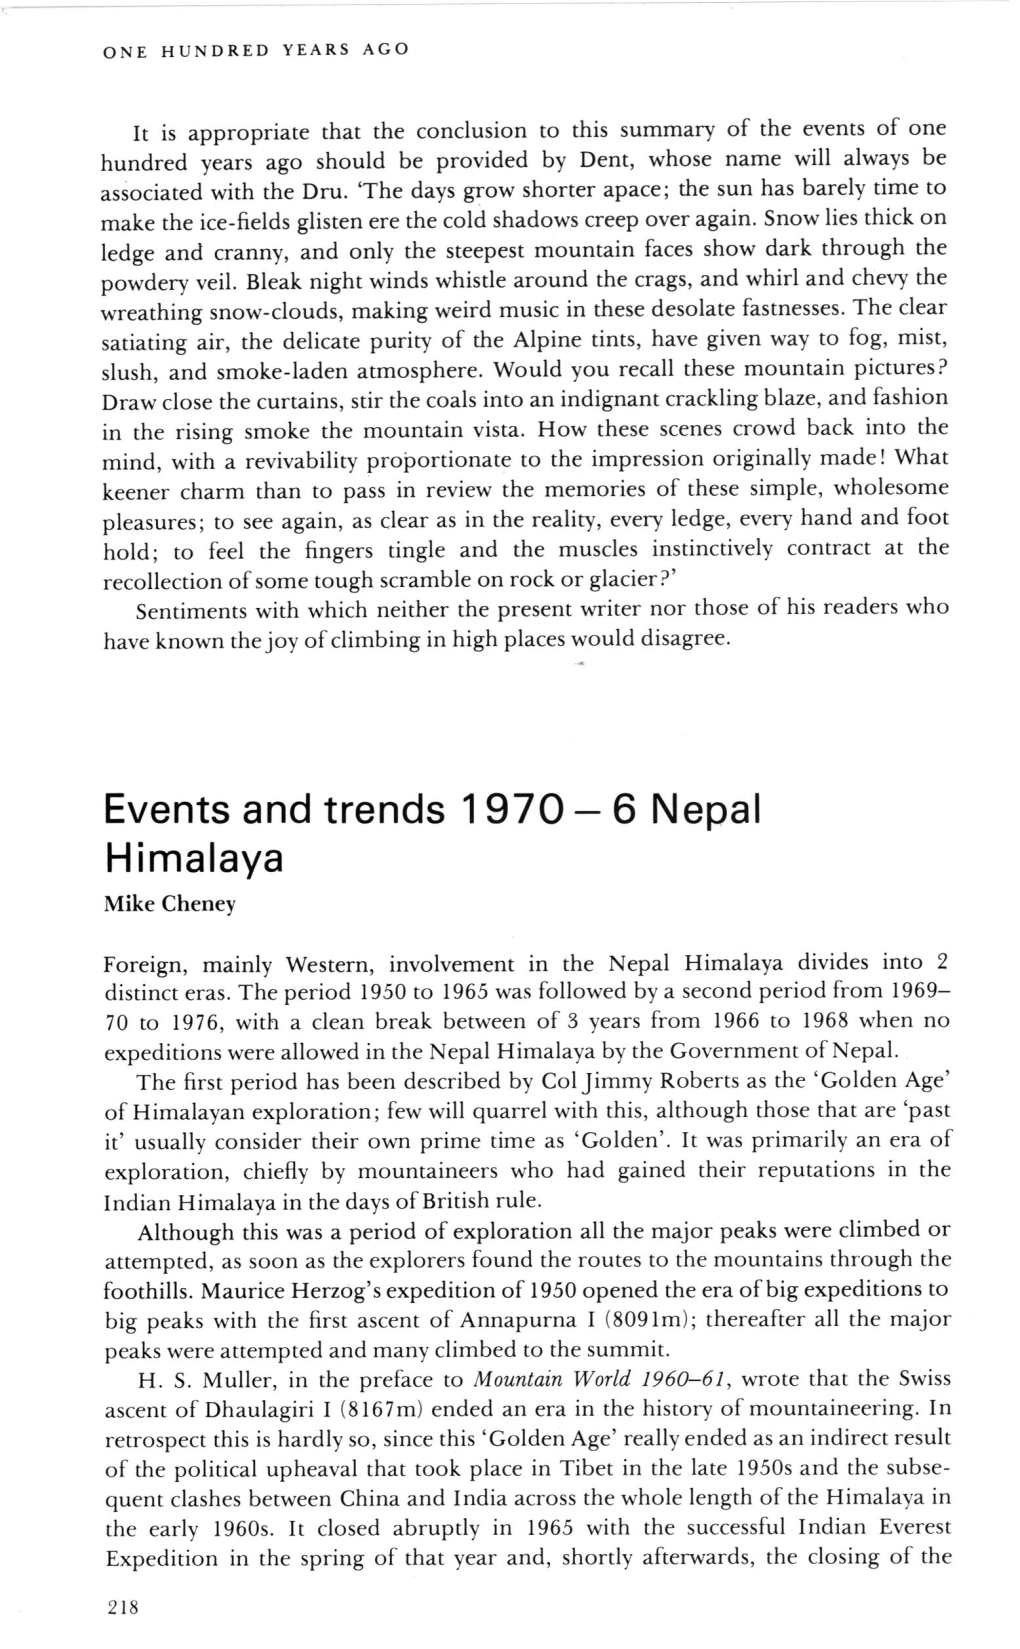 Events and Trends 1970-6 Nepal Himalaya Mike Cheney